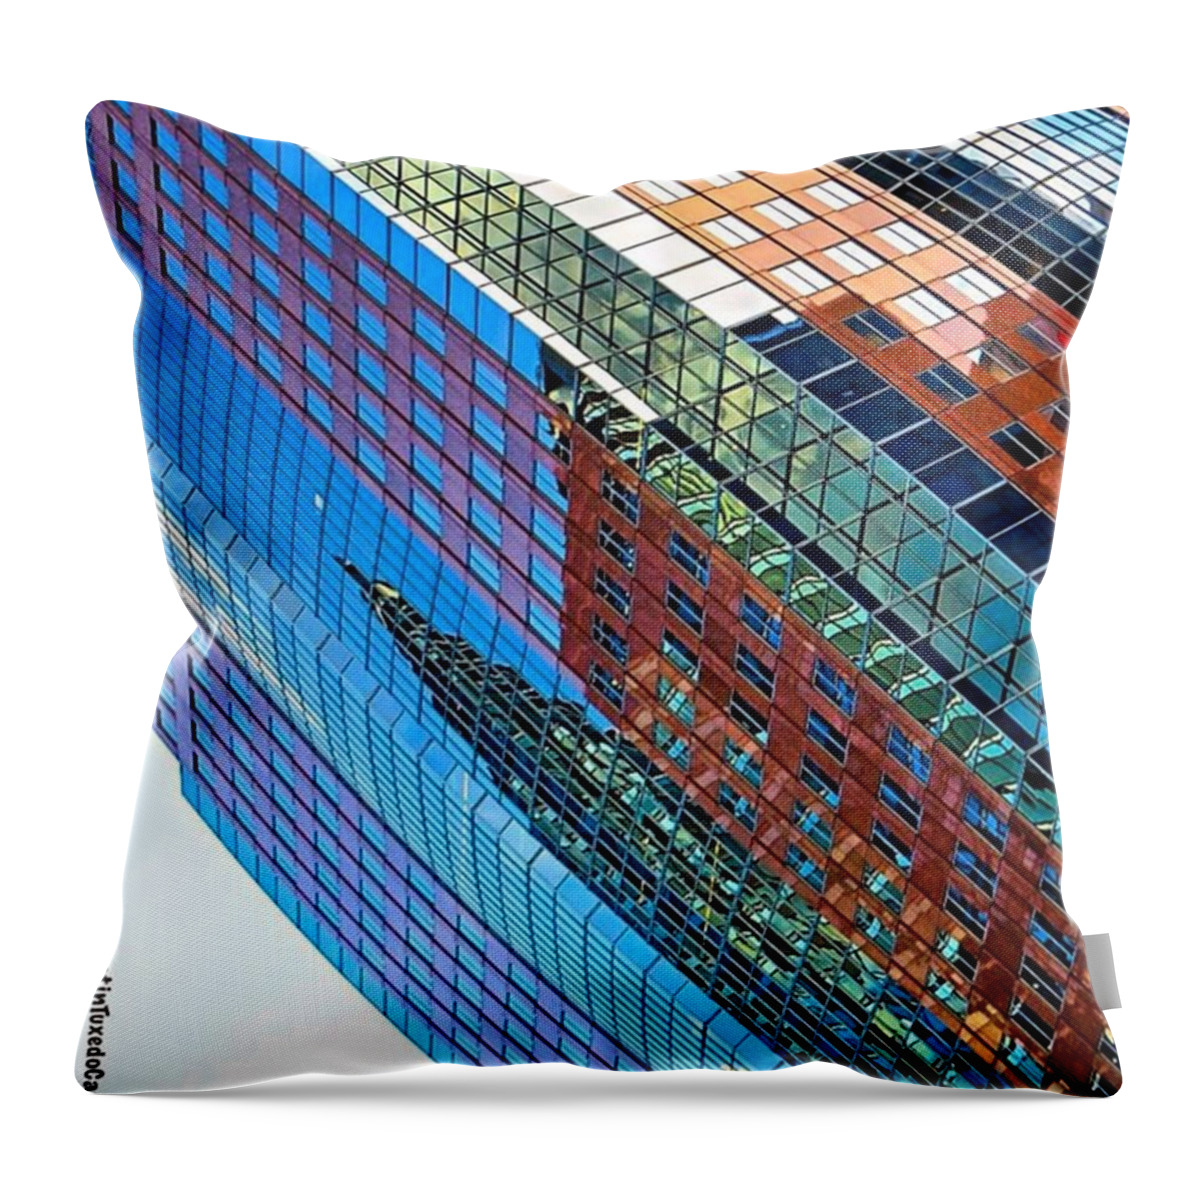 Buildings Throw Pillow featuring the photograph Wishing You A #bright And #colorful by Austin Tuxedo Cat